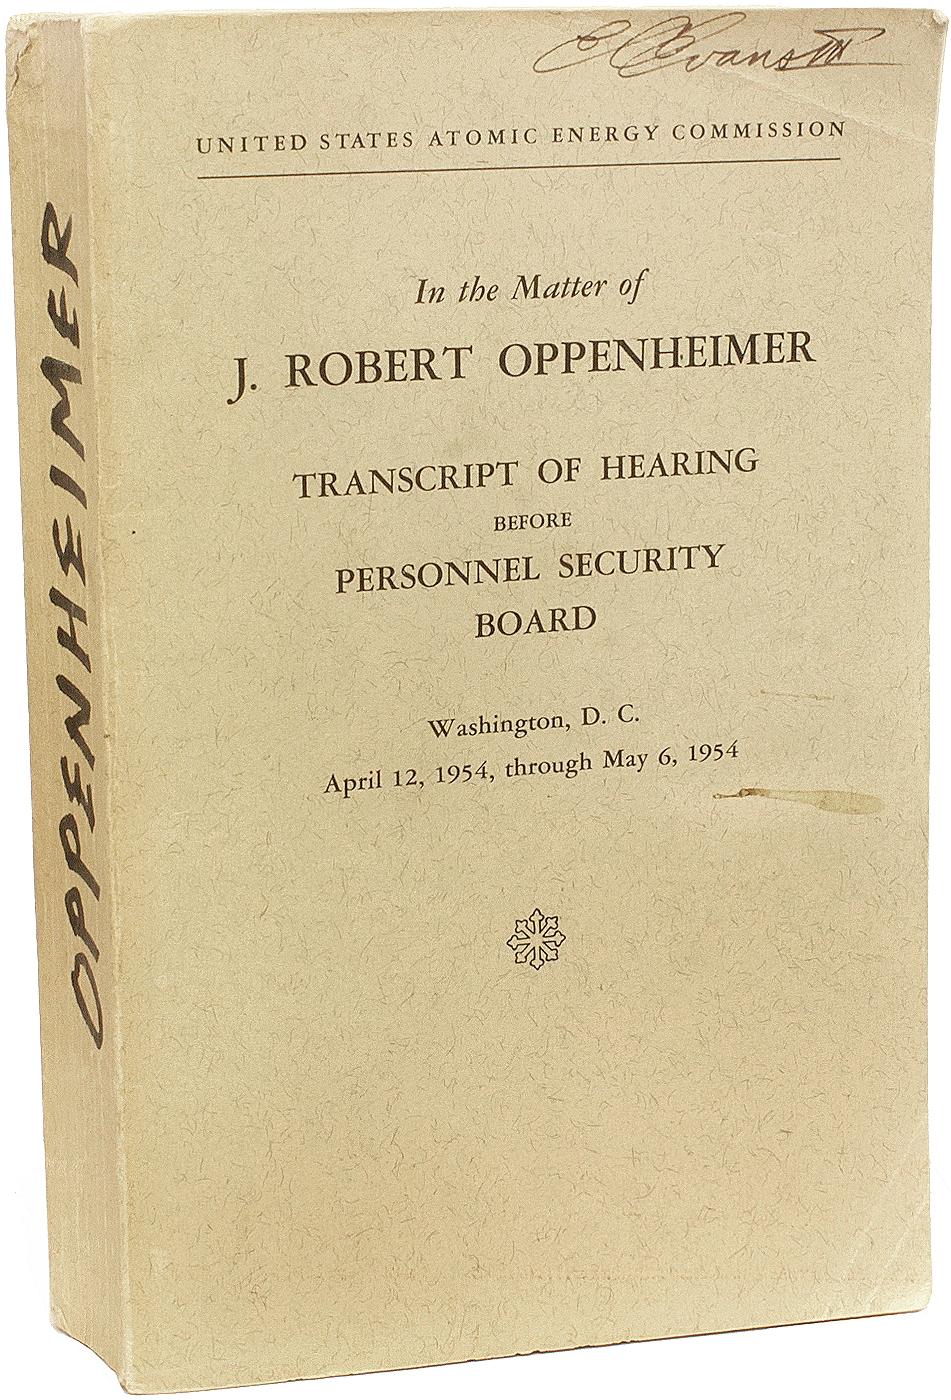 AUTHOR: [Oppenheimer, J. Robert]. United States Atomic Energy Commission.

TITLE: United States Atomic Energy Commission: In the Matter of J. Robert Oppenheimer. VOL 1. Transcript of Hearing before Personnel Security Board WDC April 12, 1954,